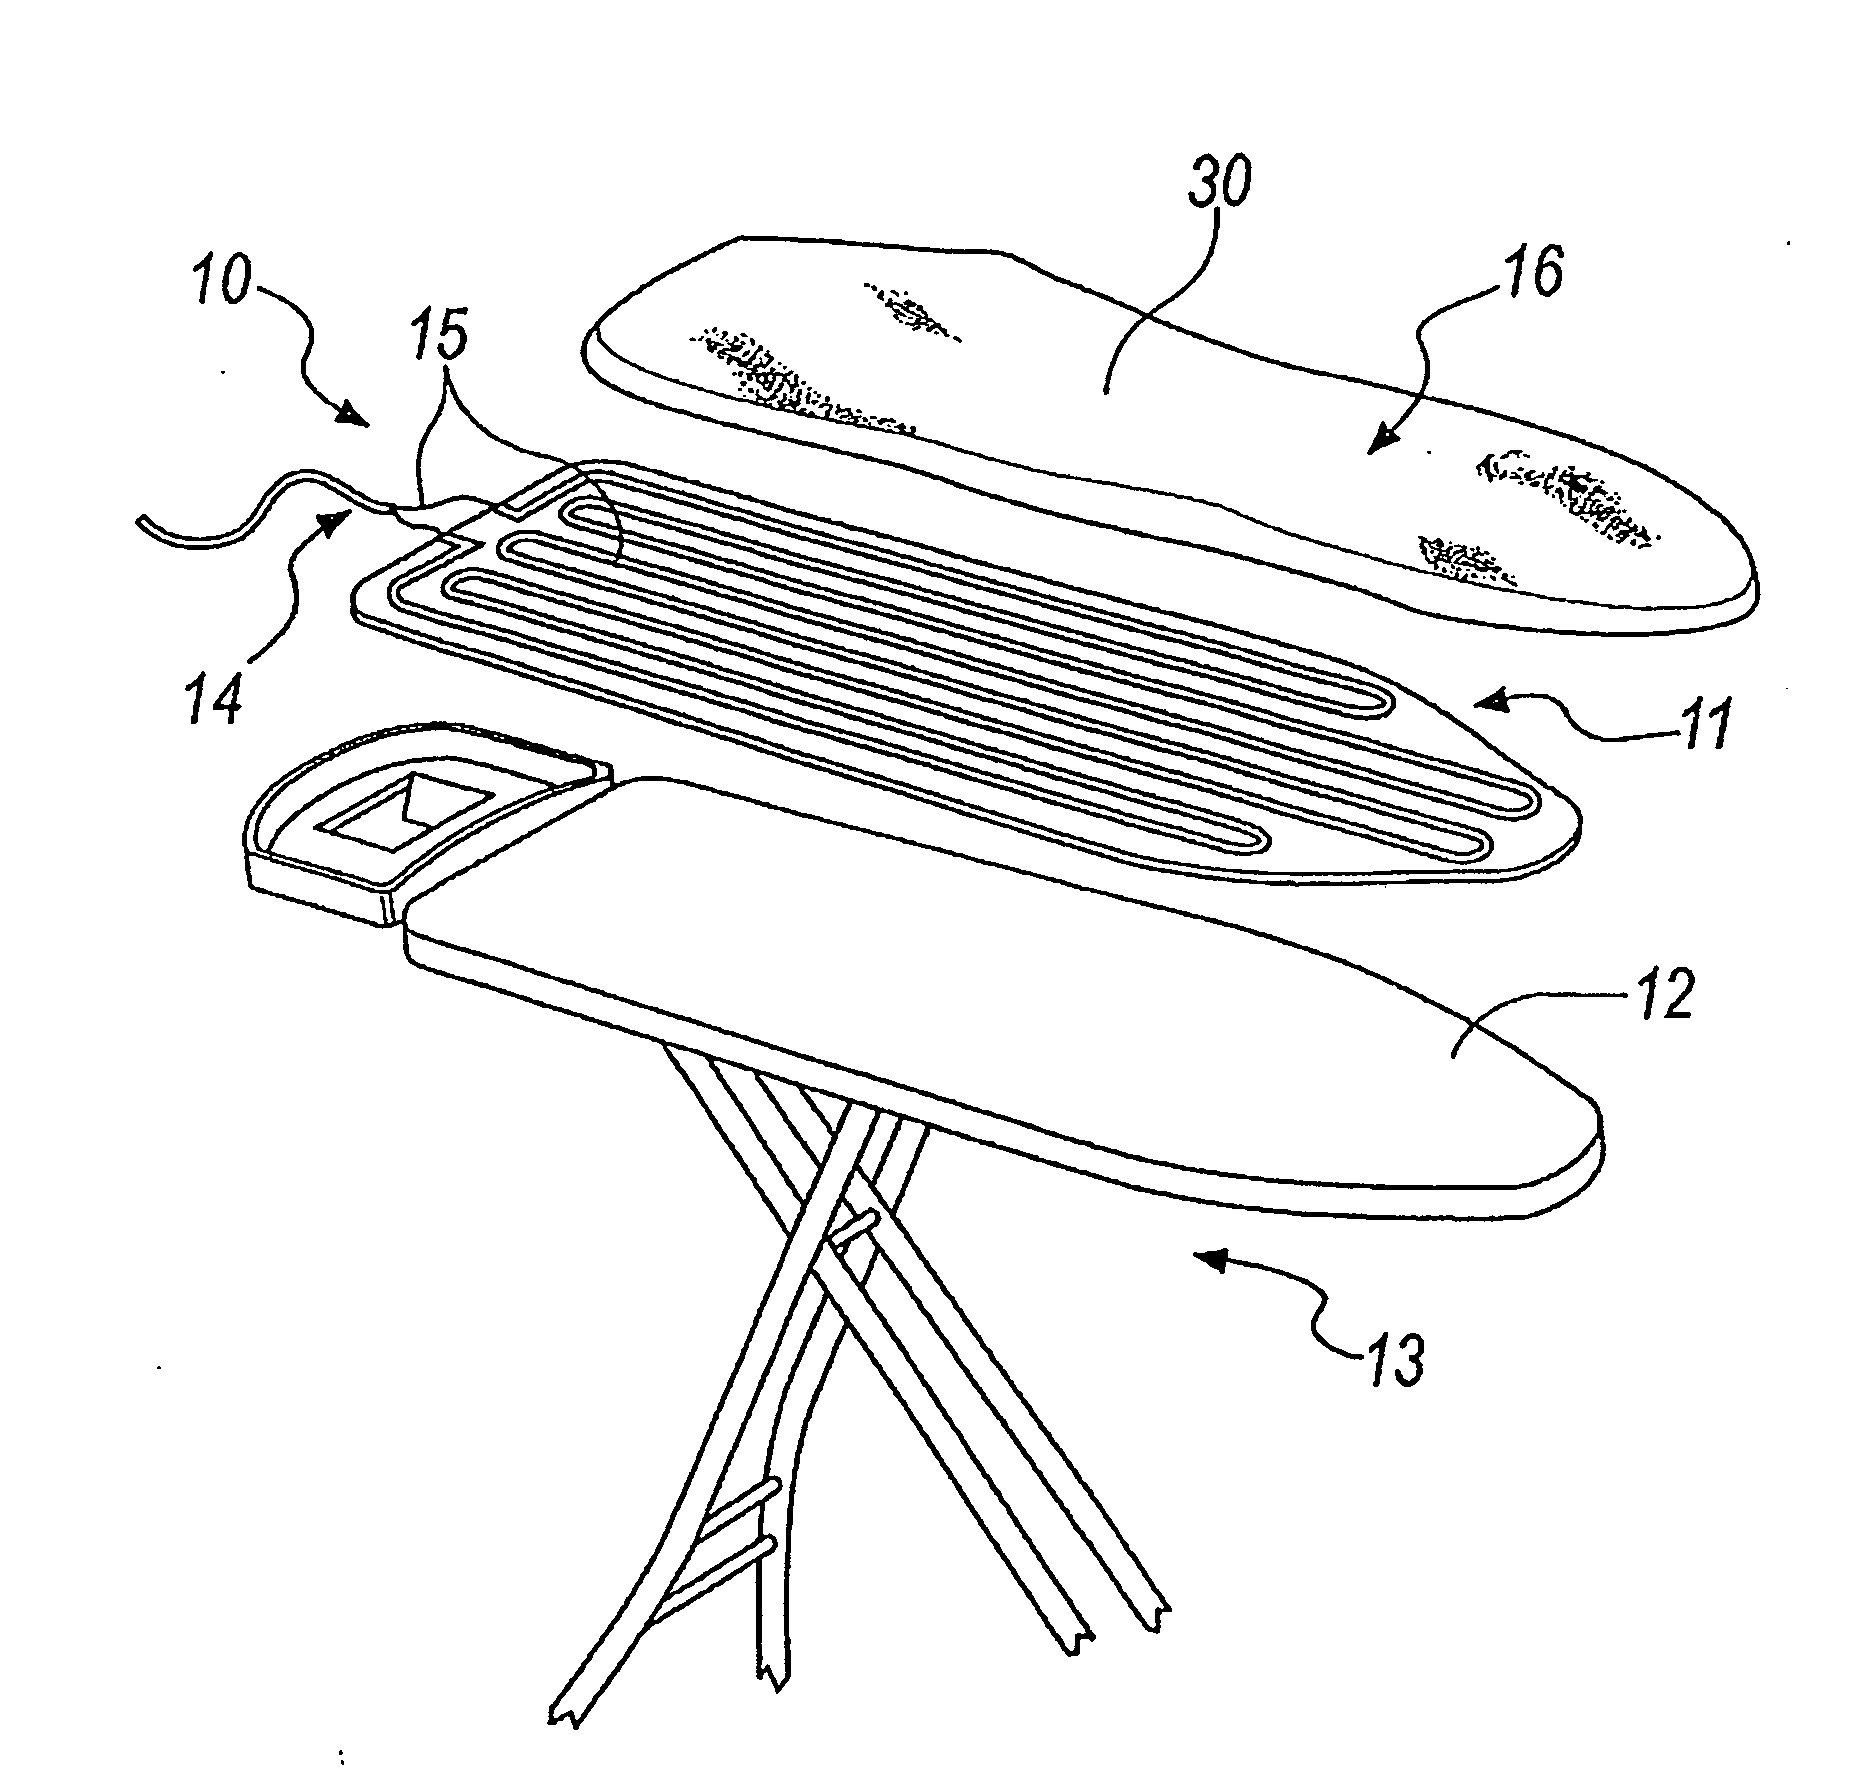 Heating device for the ironing top of an ironing board